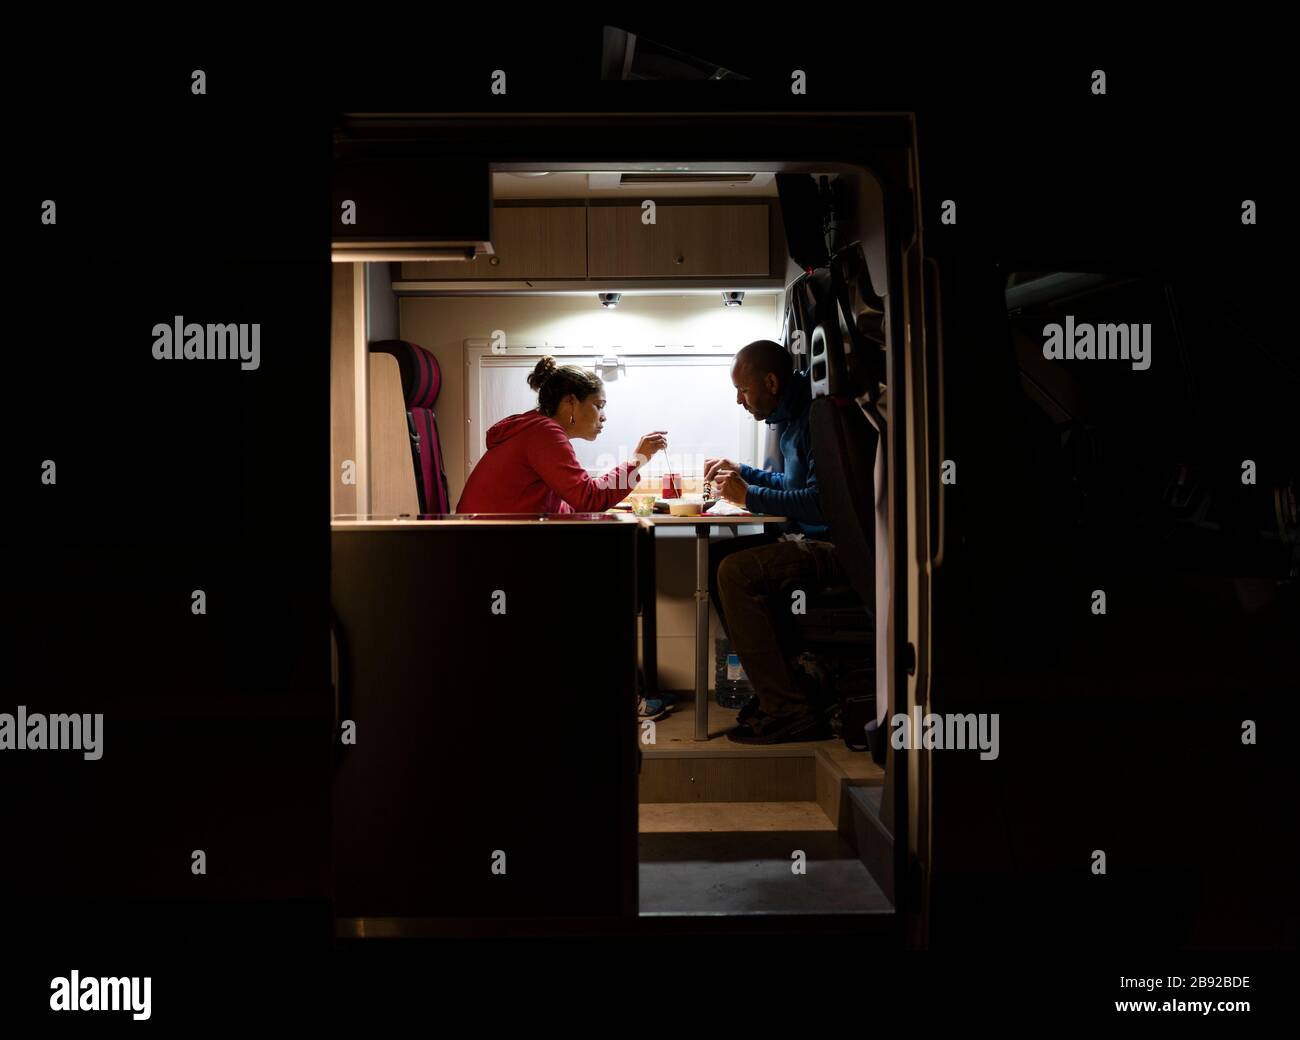 Couple having a relaxed dinner in a motorhome during a trip. Stock Photo